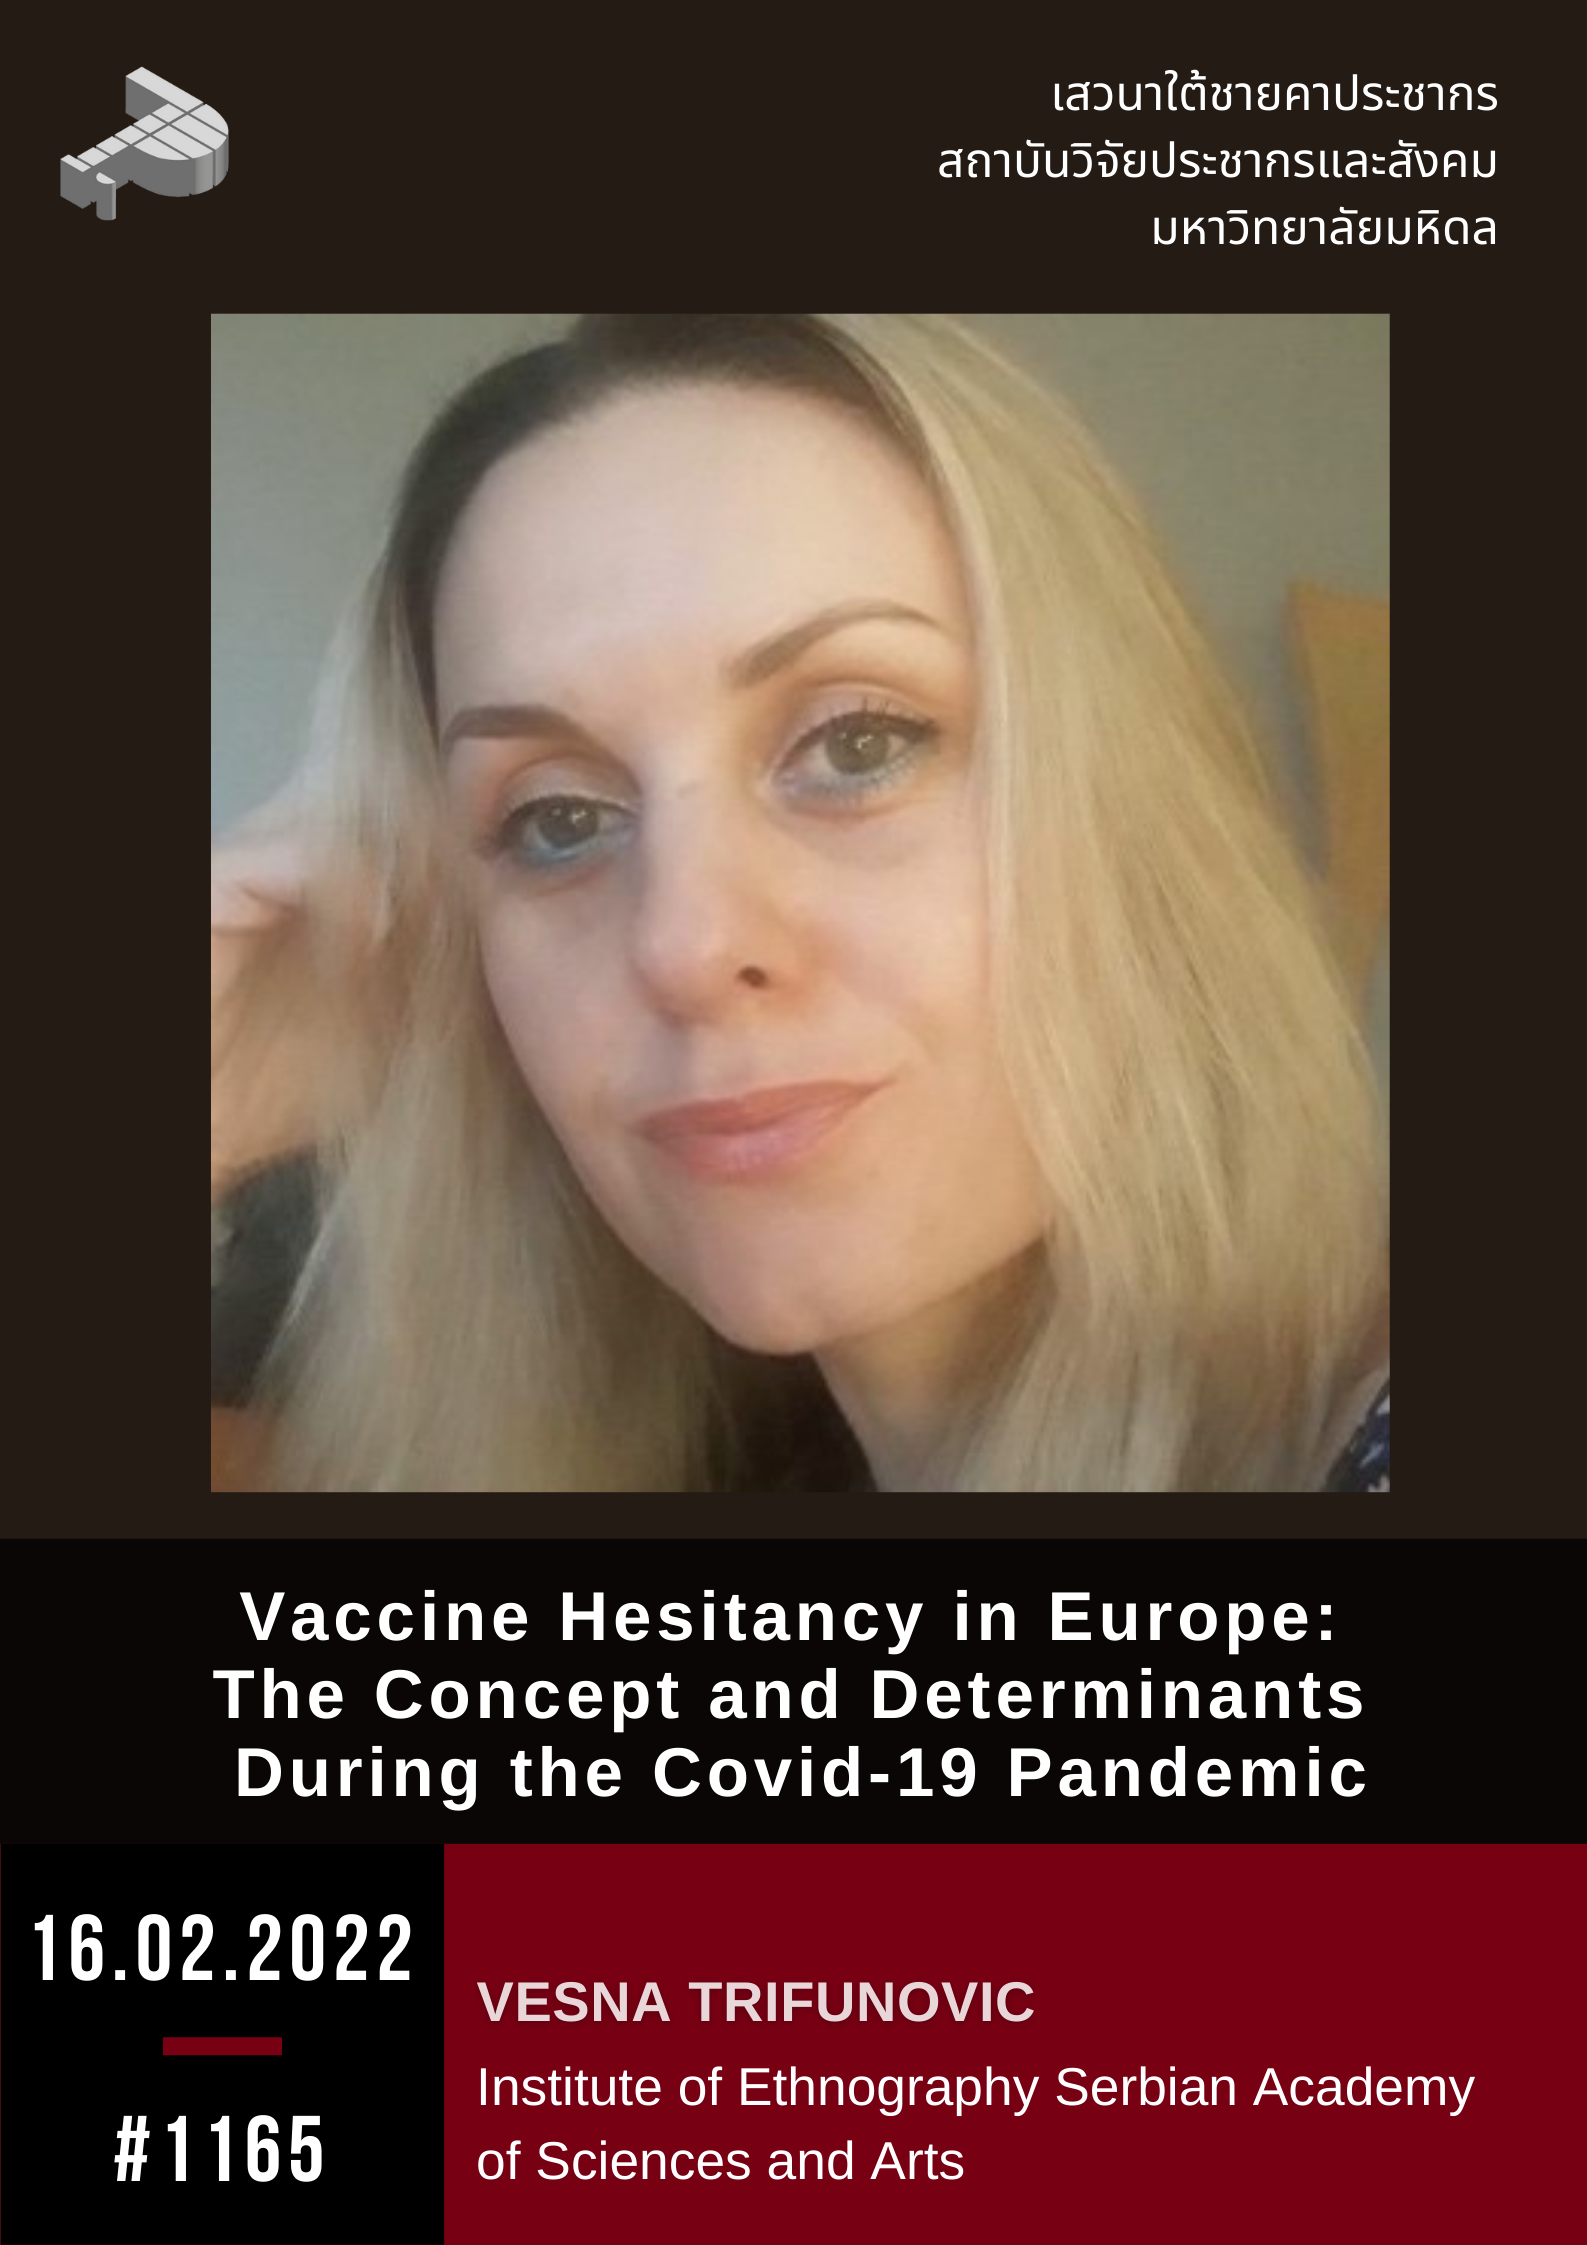 Vaccine Hesitancy in Europe: The Concept and Determinants During the COVID-19 Pandemic